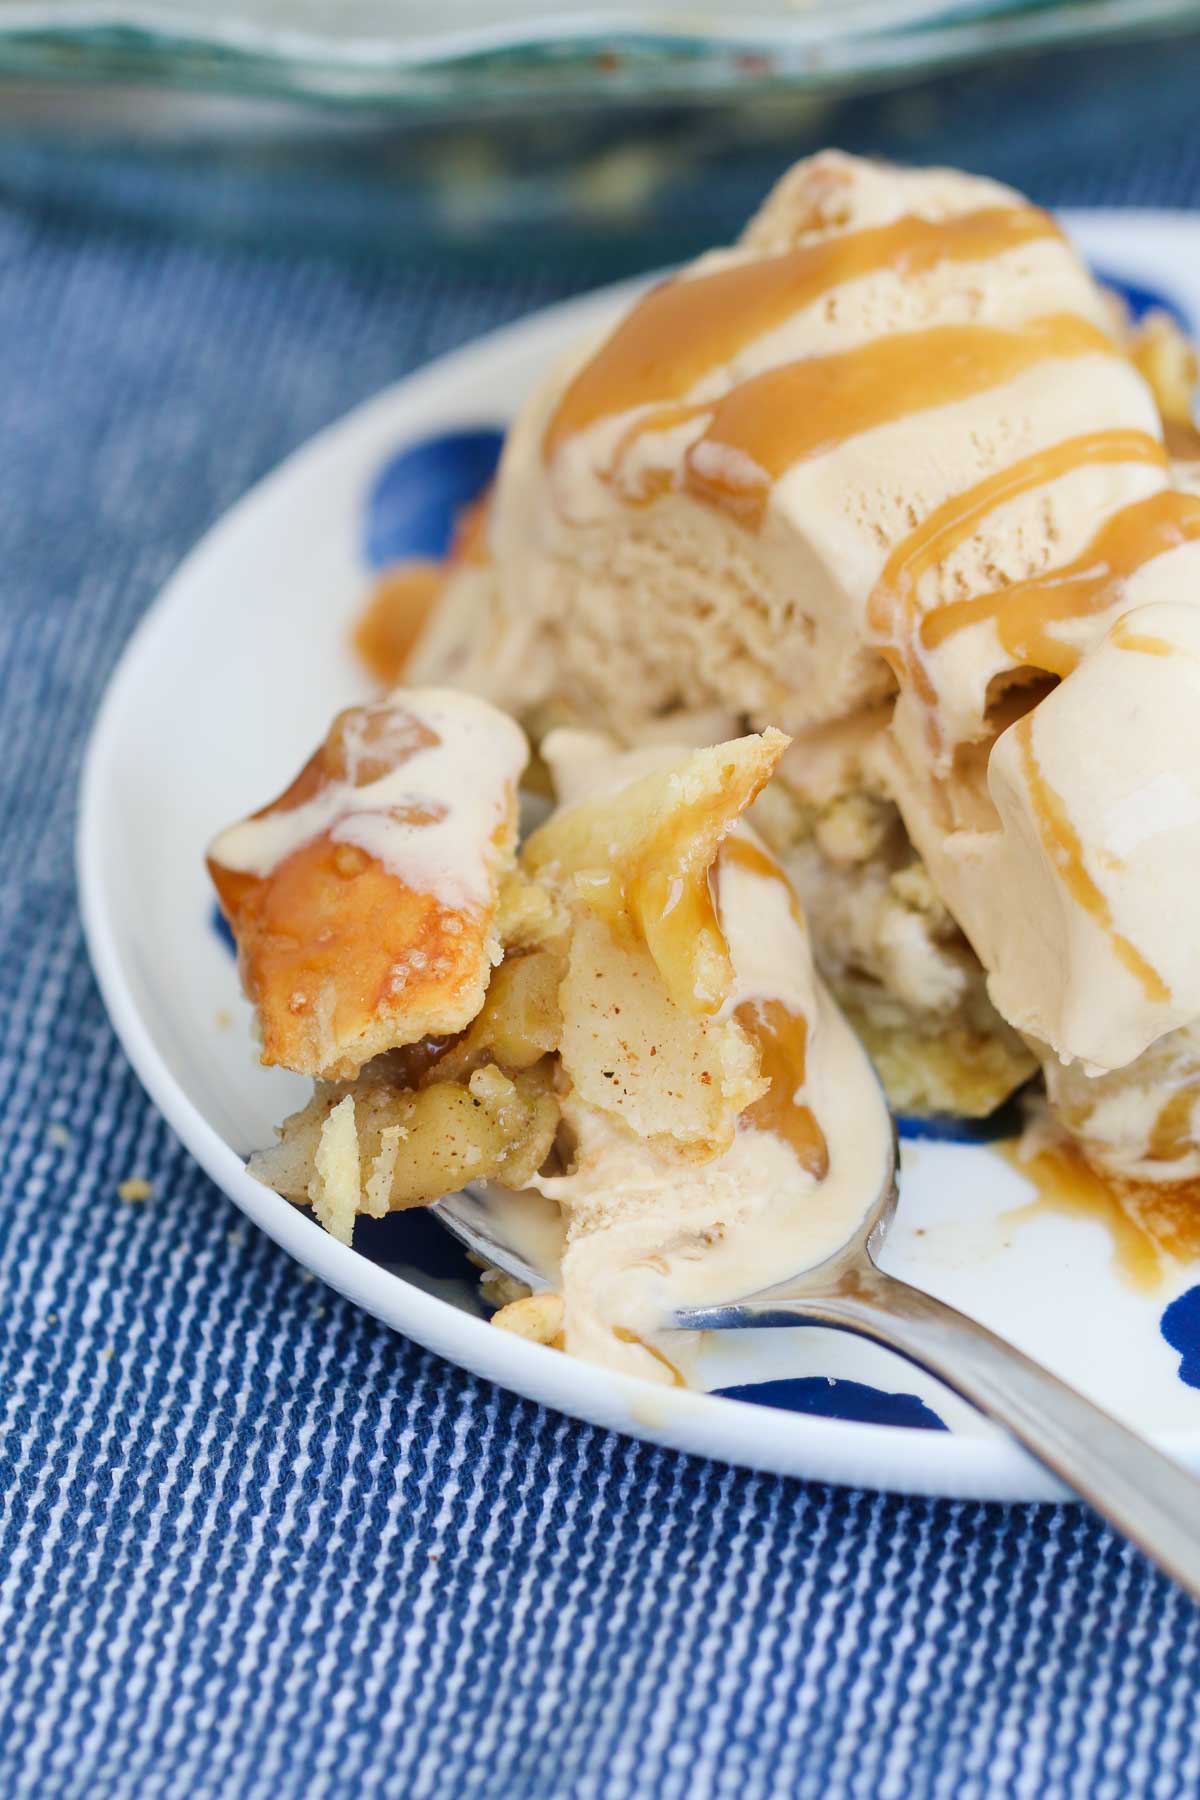 A spoonful of homemade apple pie on a spoon with ice-cream and caramel sauce.